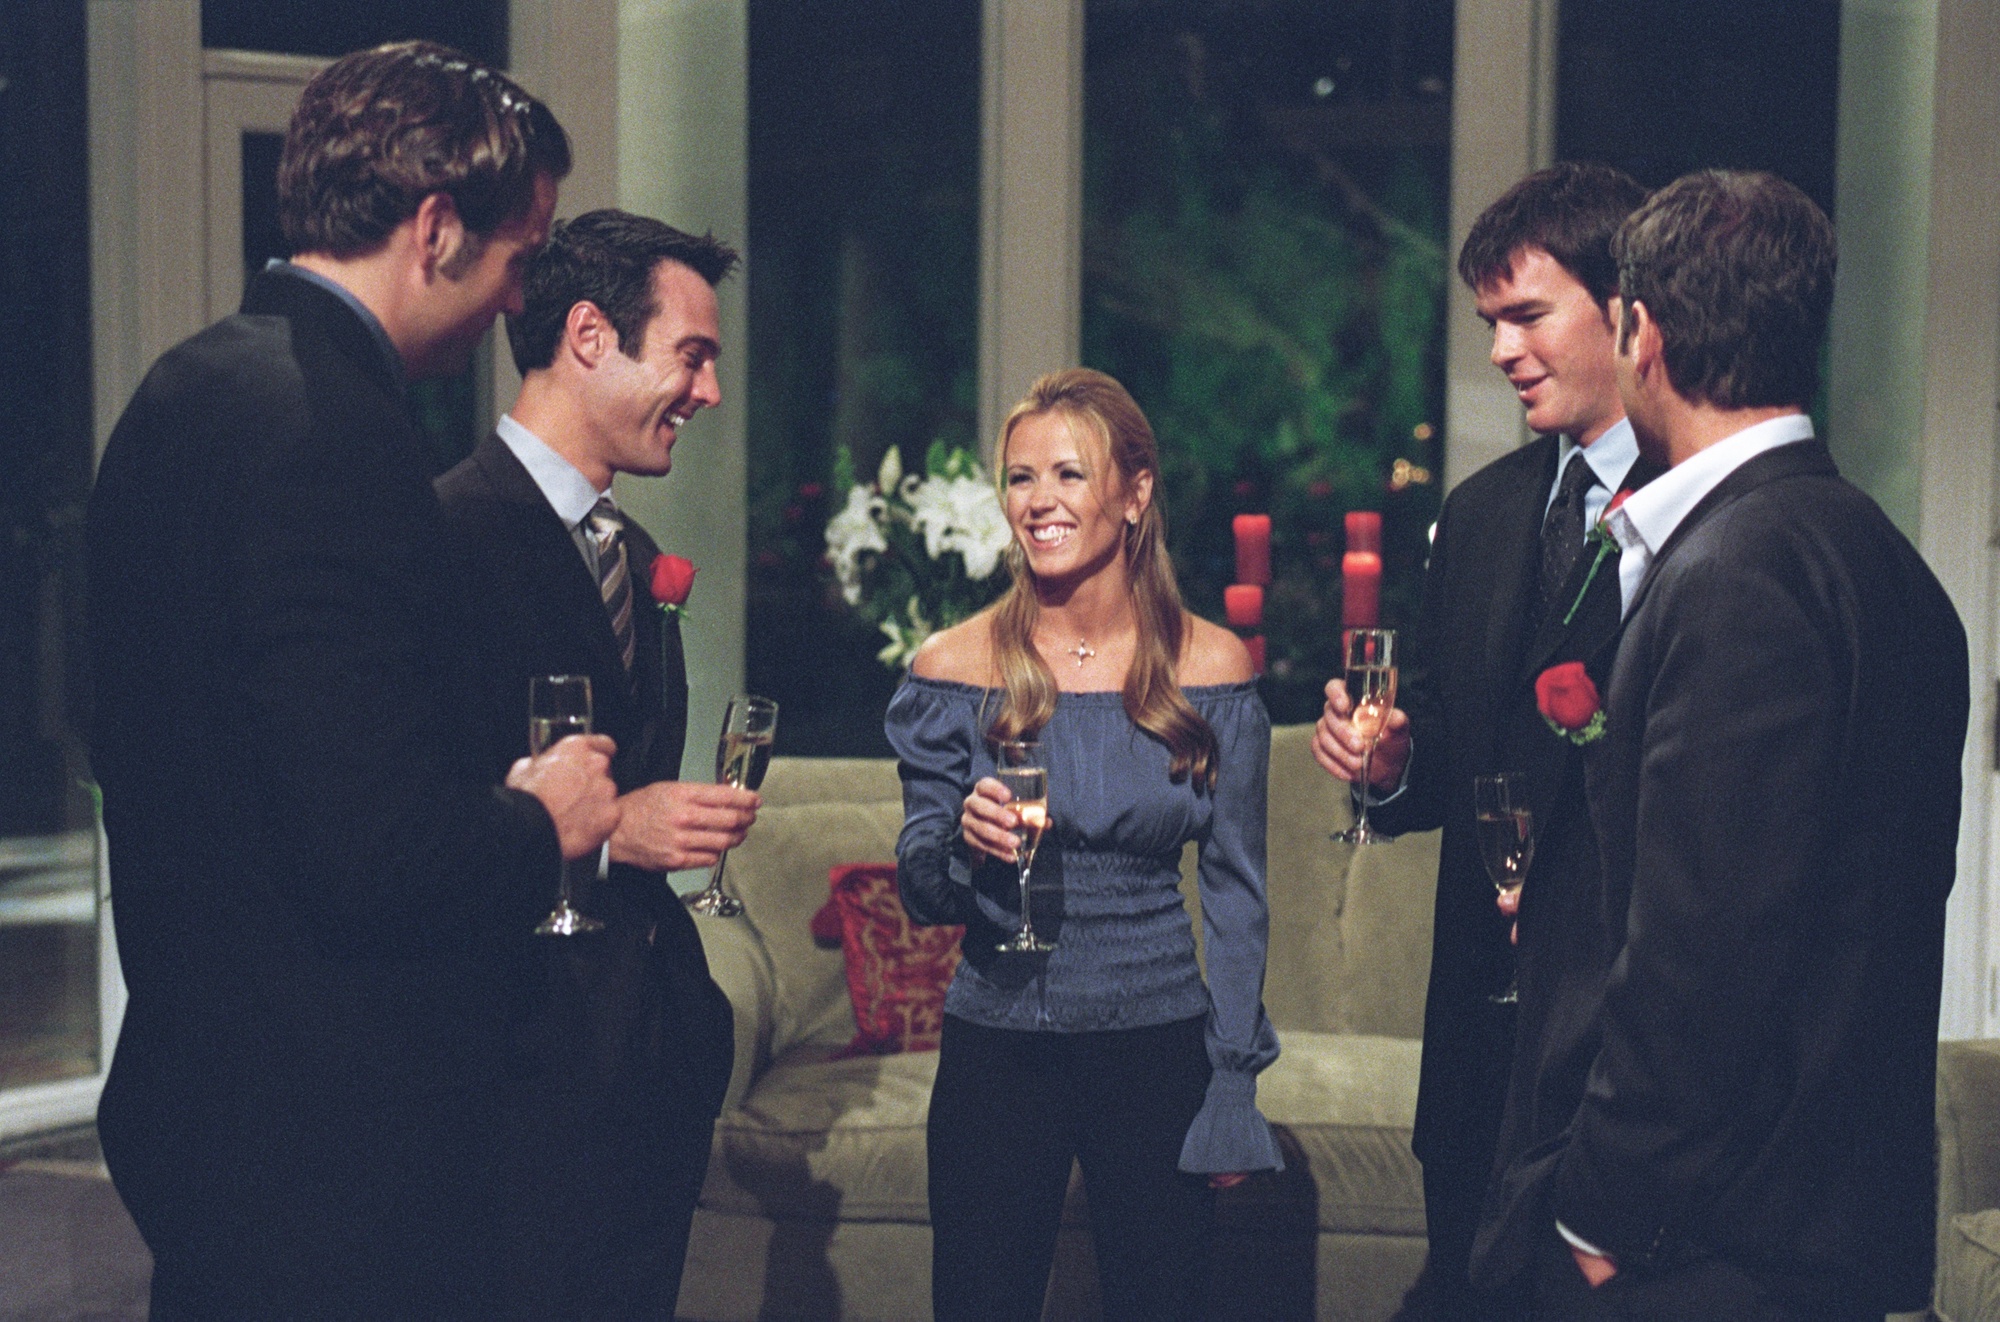 Best of 'The Bachelorette' season 1, Trista with a group of bachelors, drinking champagne